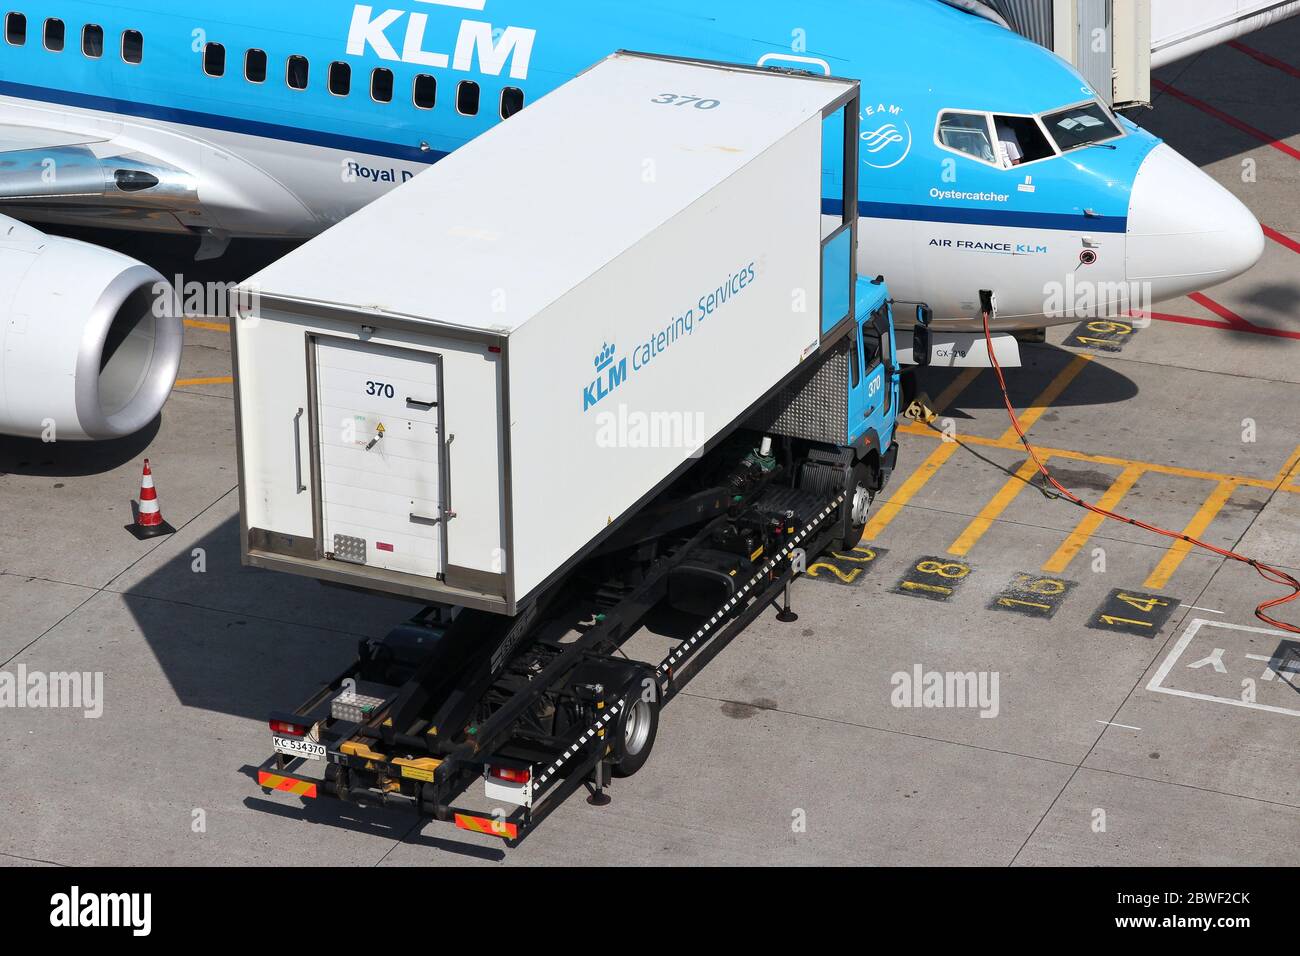 KLM Catering Services truck serving KLM Boeing 737 at Amsterdam Airport Schiphol. Stock Photo